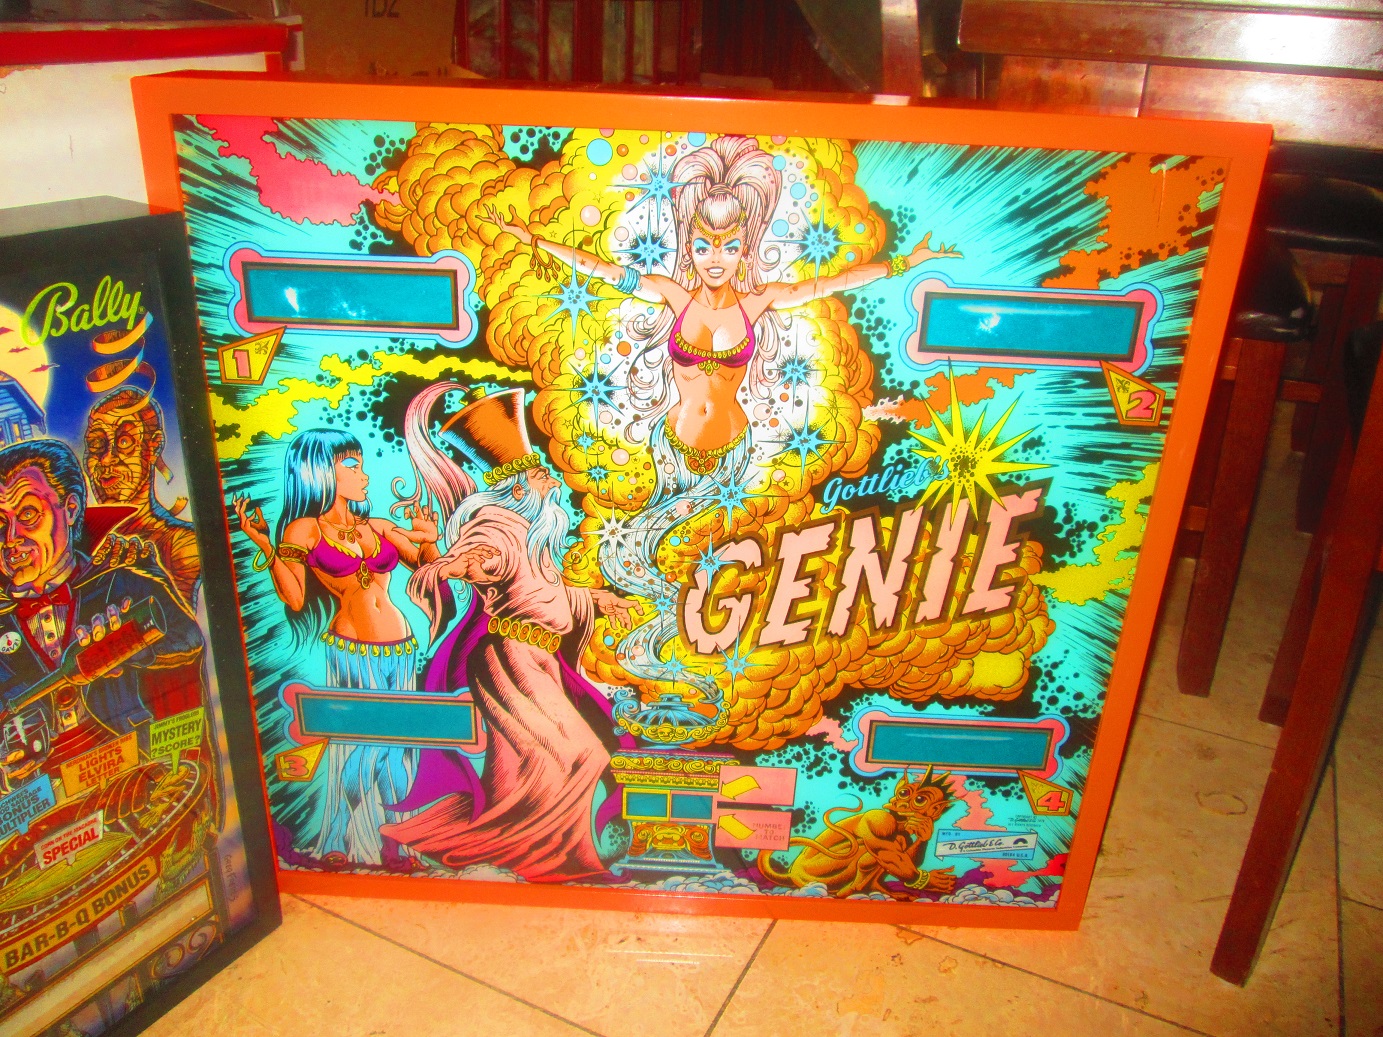 Here's Genie looking great in its new frame!